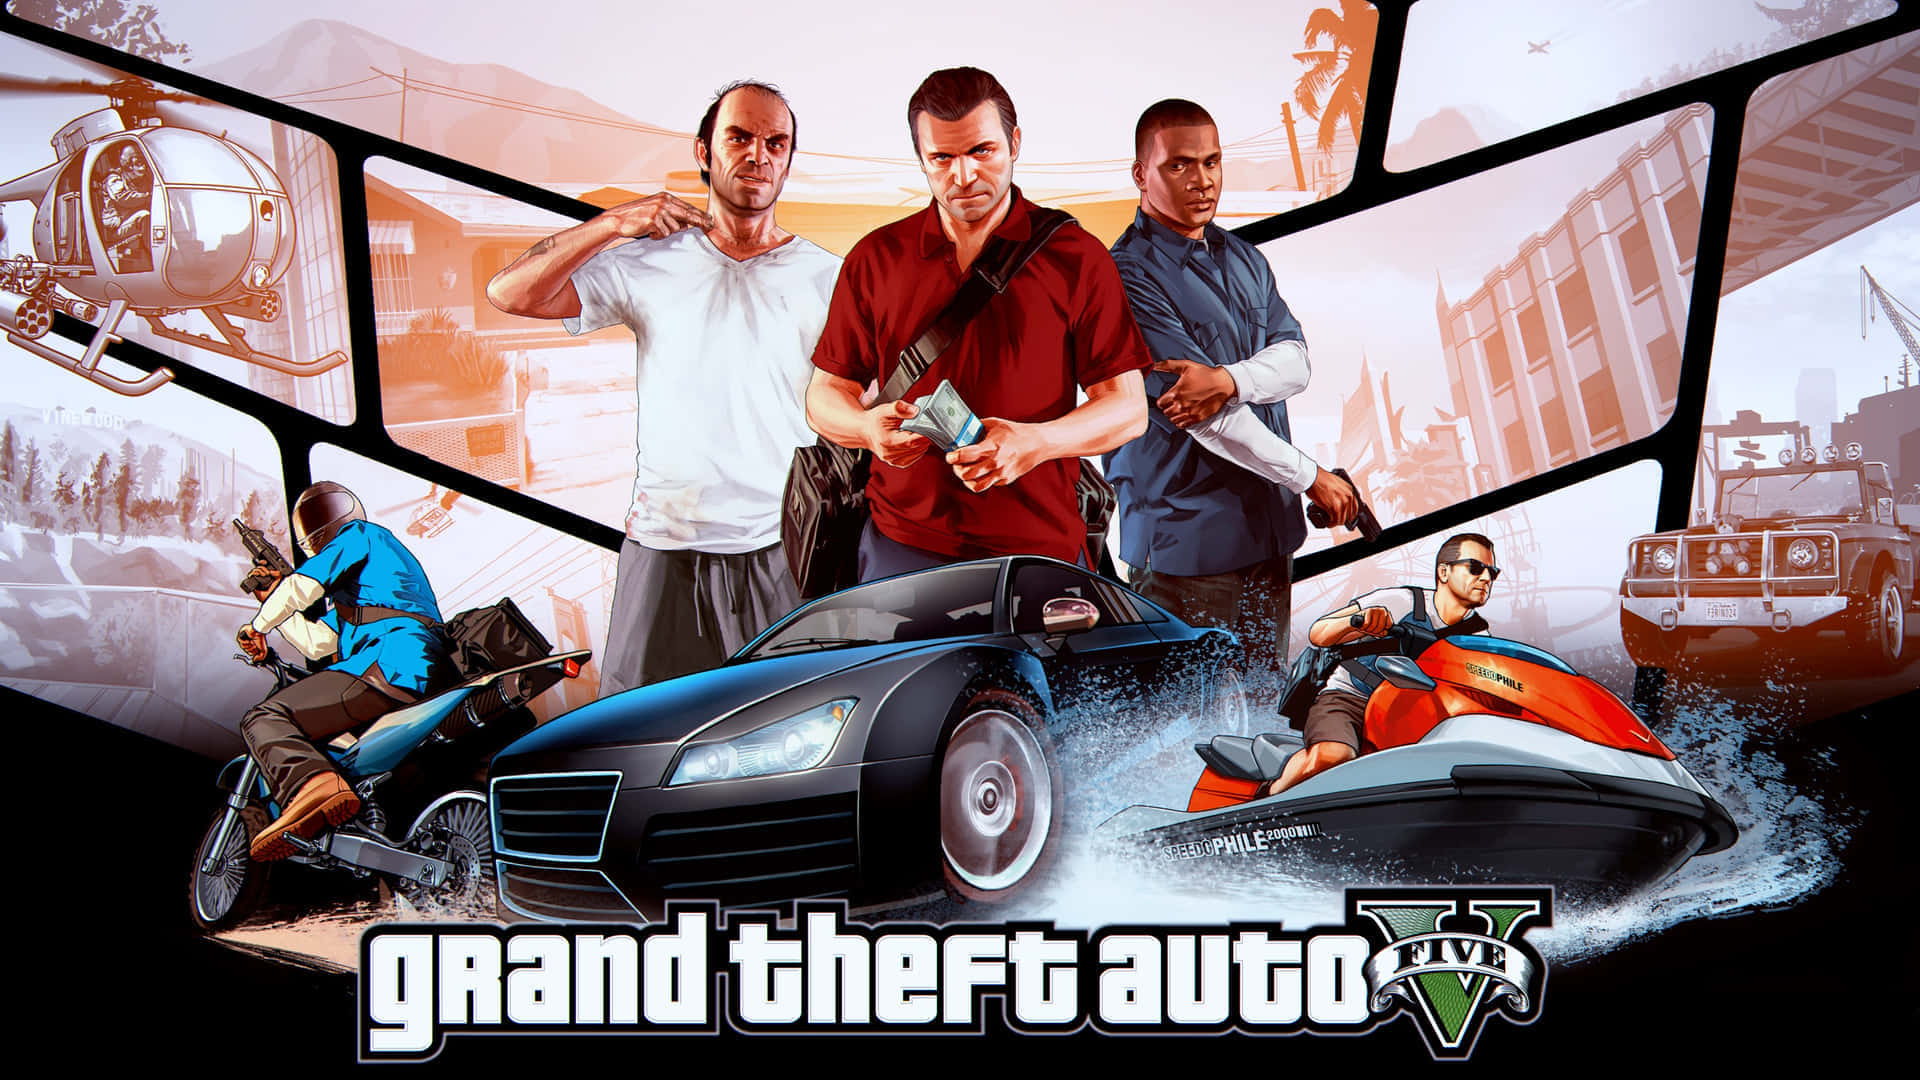 GTA 5 has revolutionized the sandbox video gaming experience.  Make your own Road. Description: Grand Theft Auto 5 immerses players in a giant open world with endless possibilities, top-of-the-line graphics and a thrilling storyline. Related Keywords: GTA 5, Open World, Sandbox, Video Games, Rockstar, Xbox, PlayStation, PC.